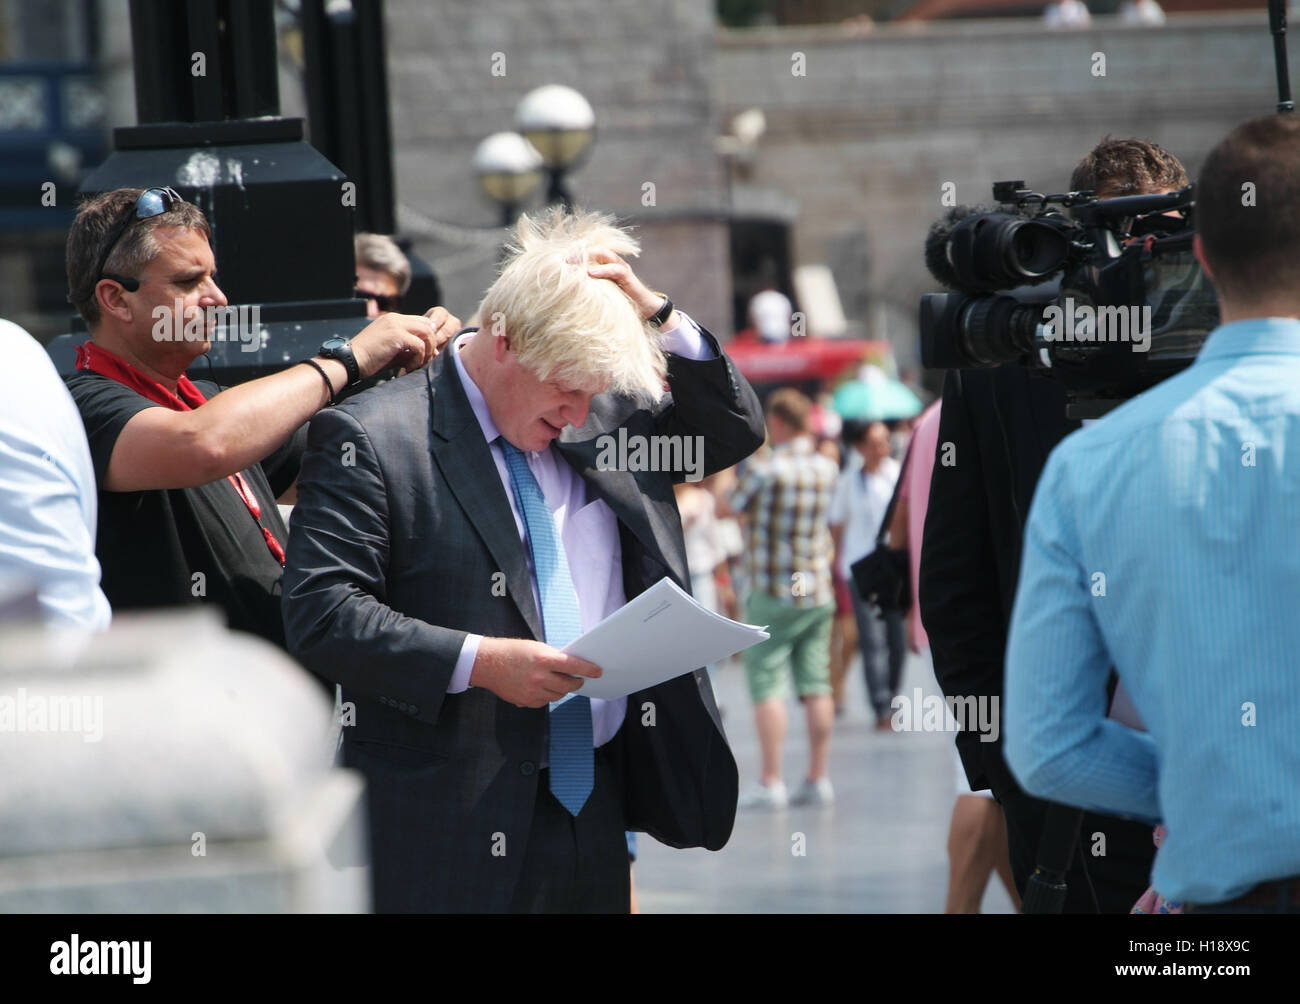 LONDON, UK - JULY 17TH 2013: London mayor Boris Johnson preparing to give an interview outside the City Hall in London, UK, on J Stock Photo